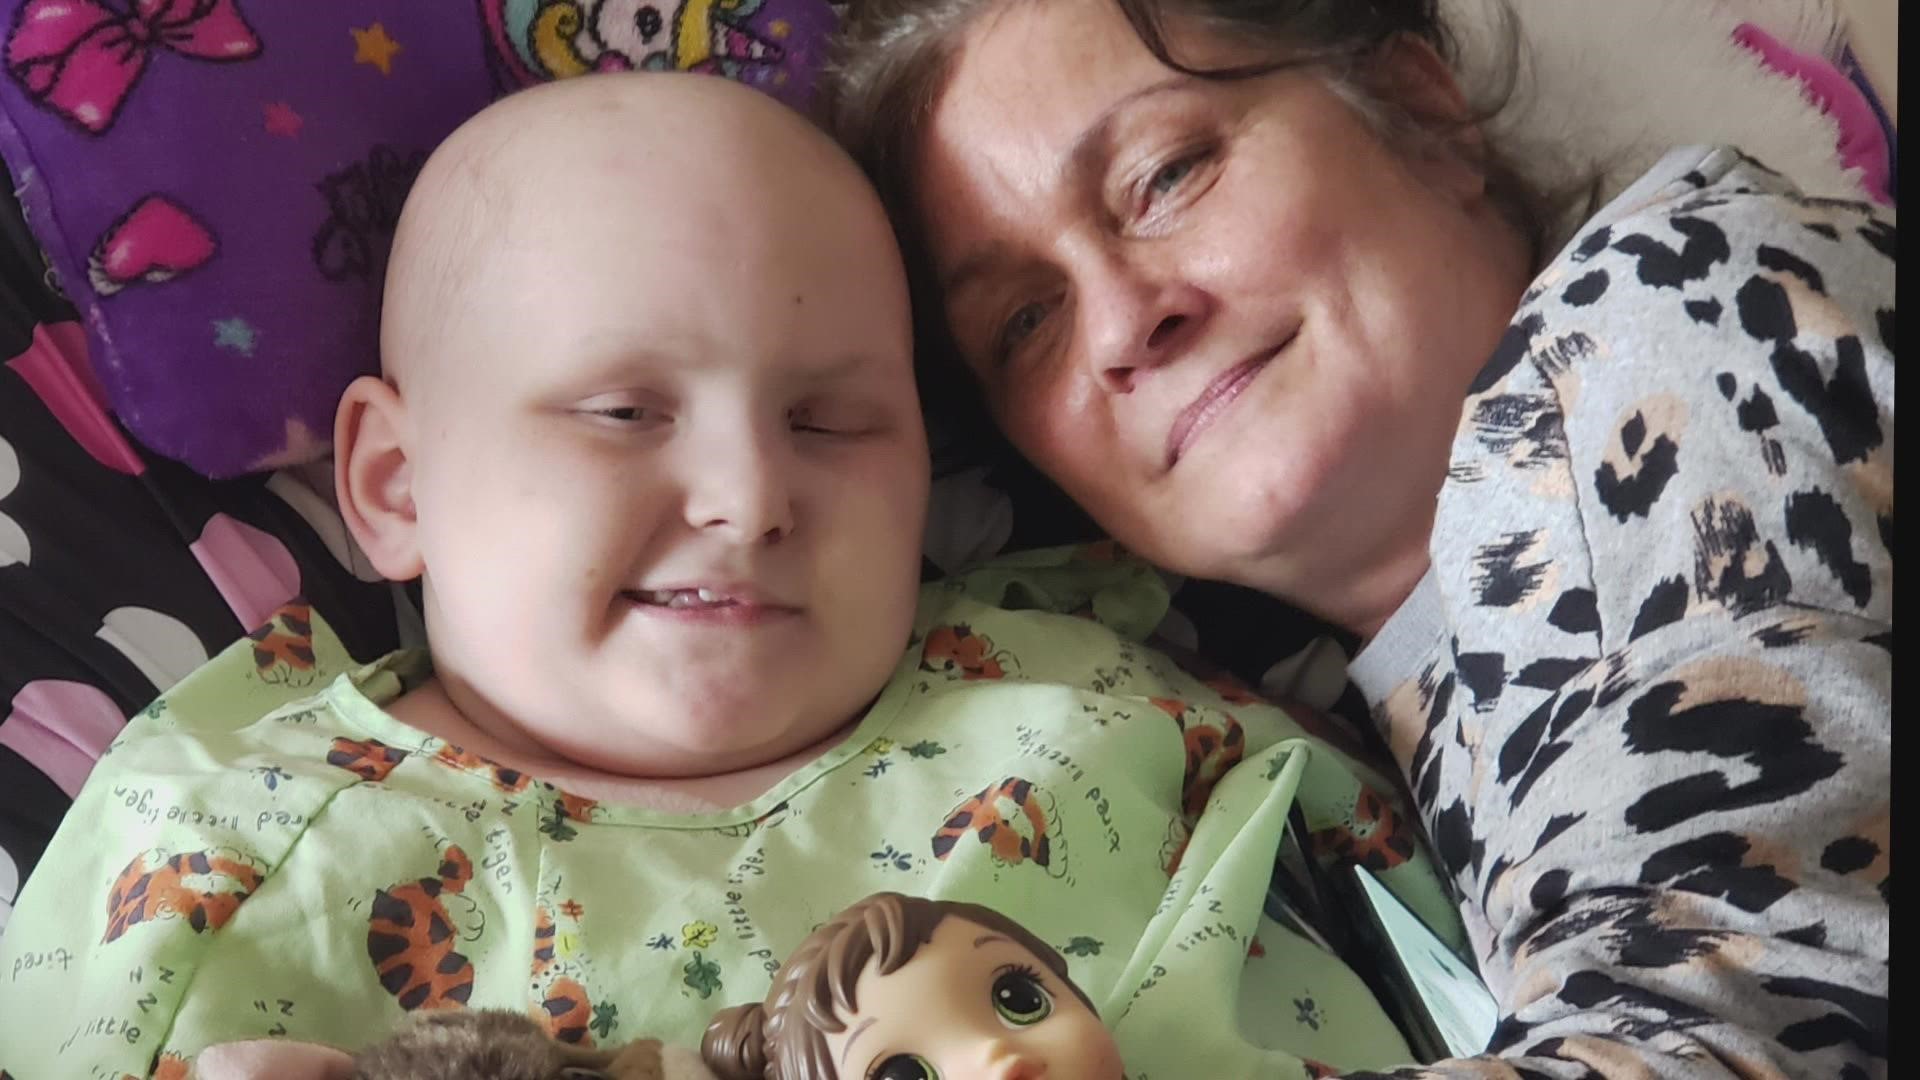 Emmi was due to come home next month to continue her treatment, but that will be easier said than done. While in the hospital, her home in Plymouth was destroyed.